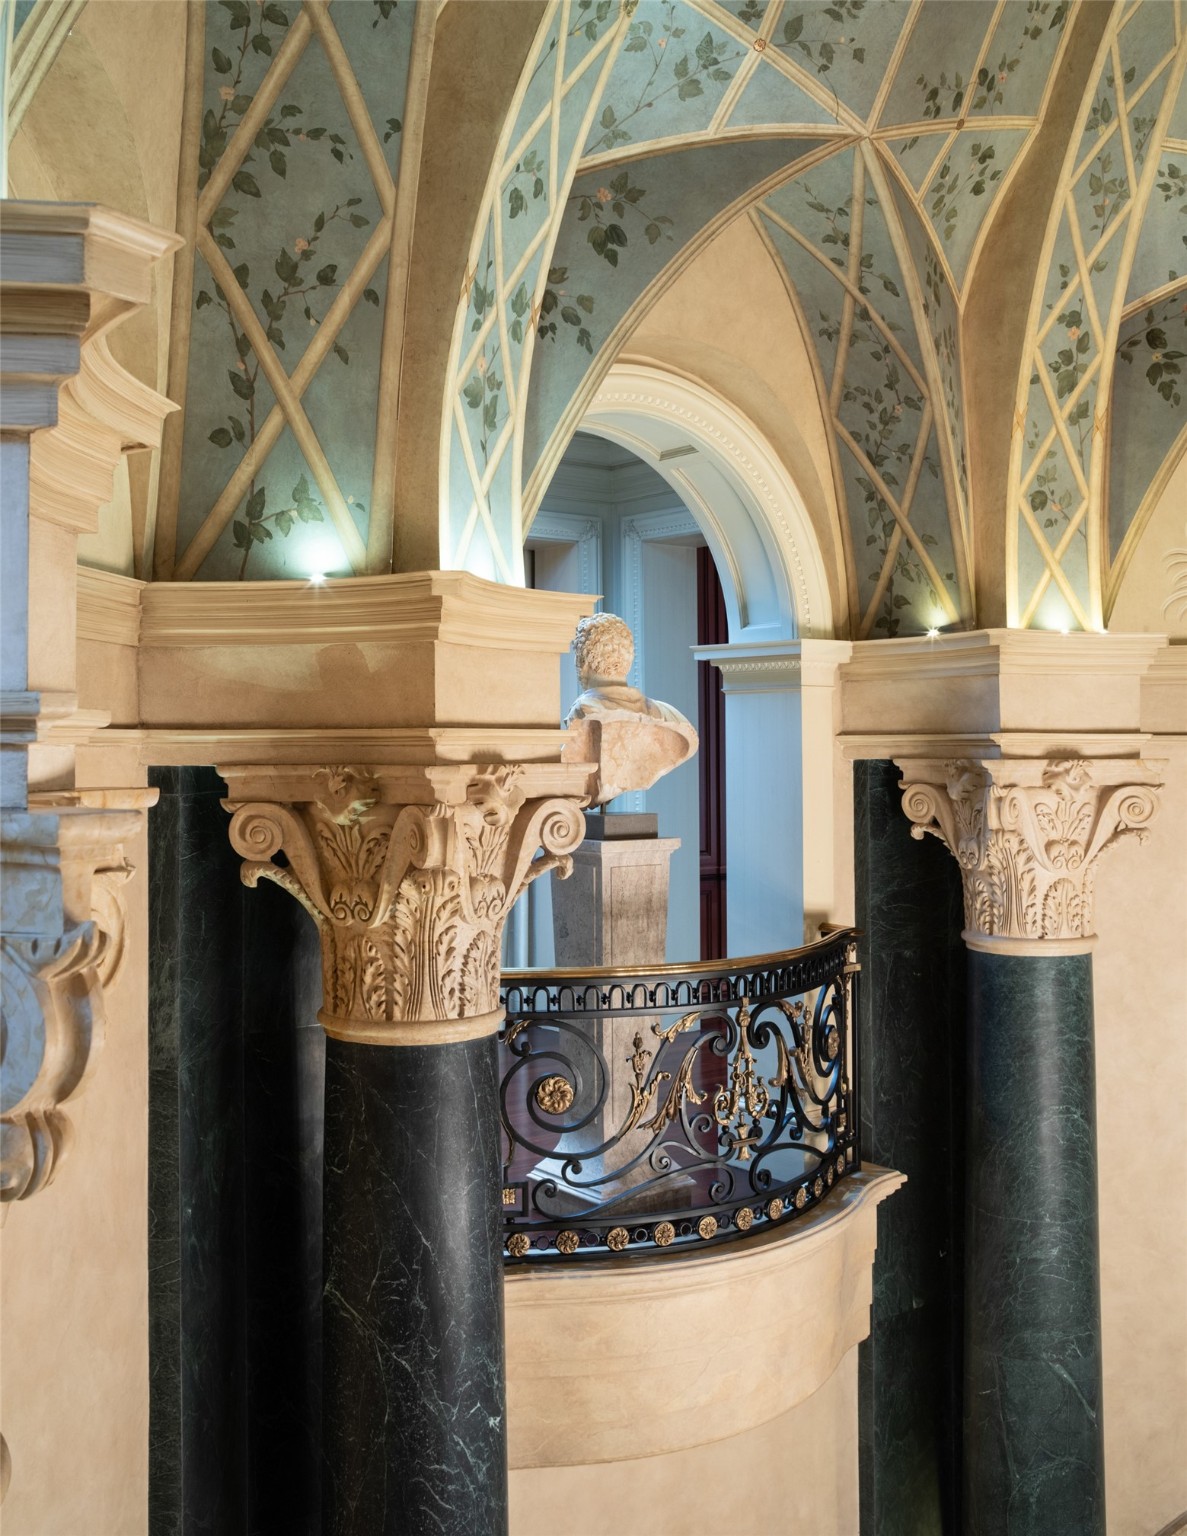 Iron scrollwork on the Juliet balconies matches the ornate detail of the Corinthian capitals.